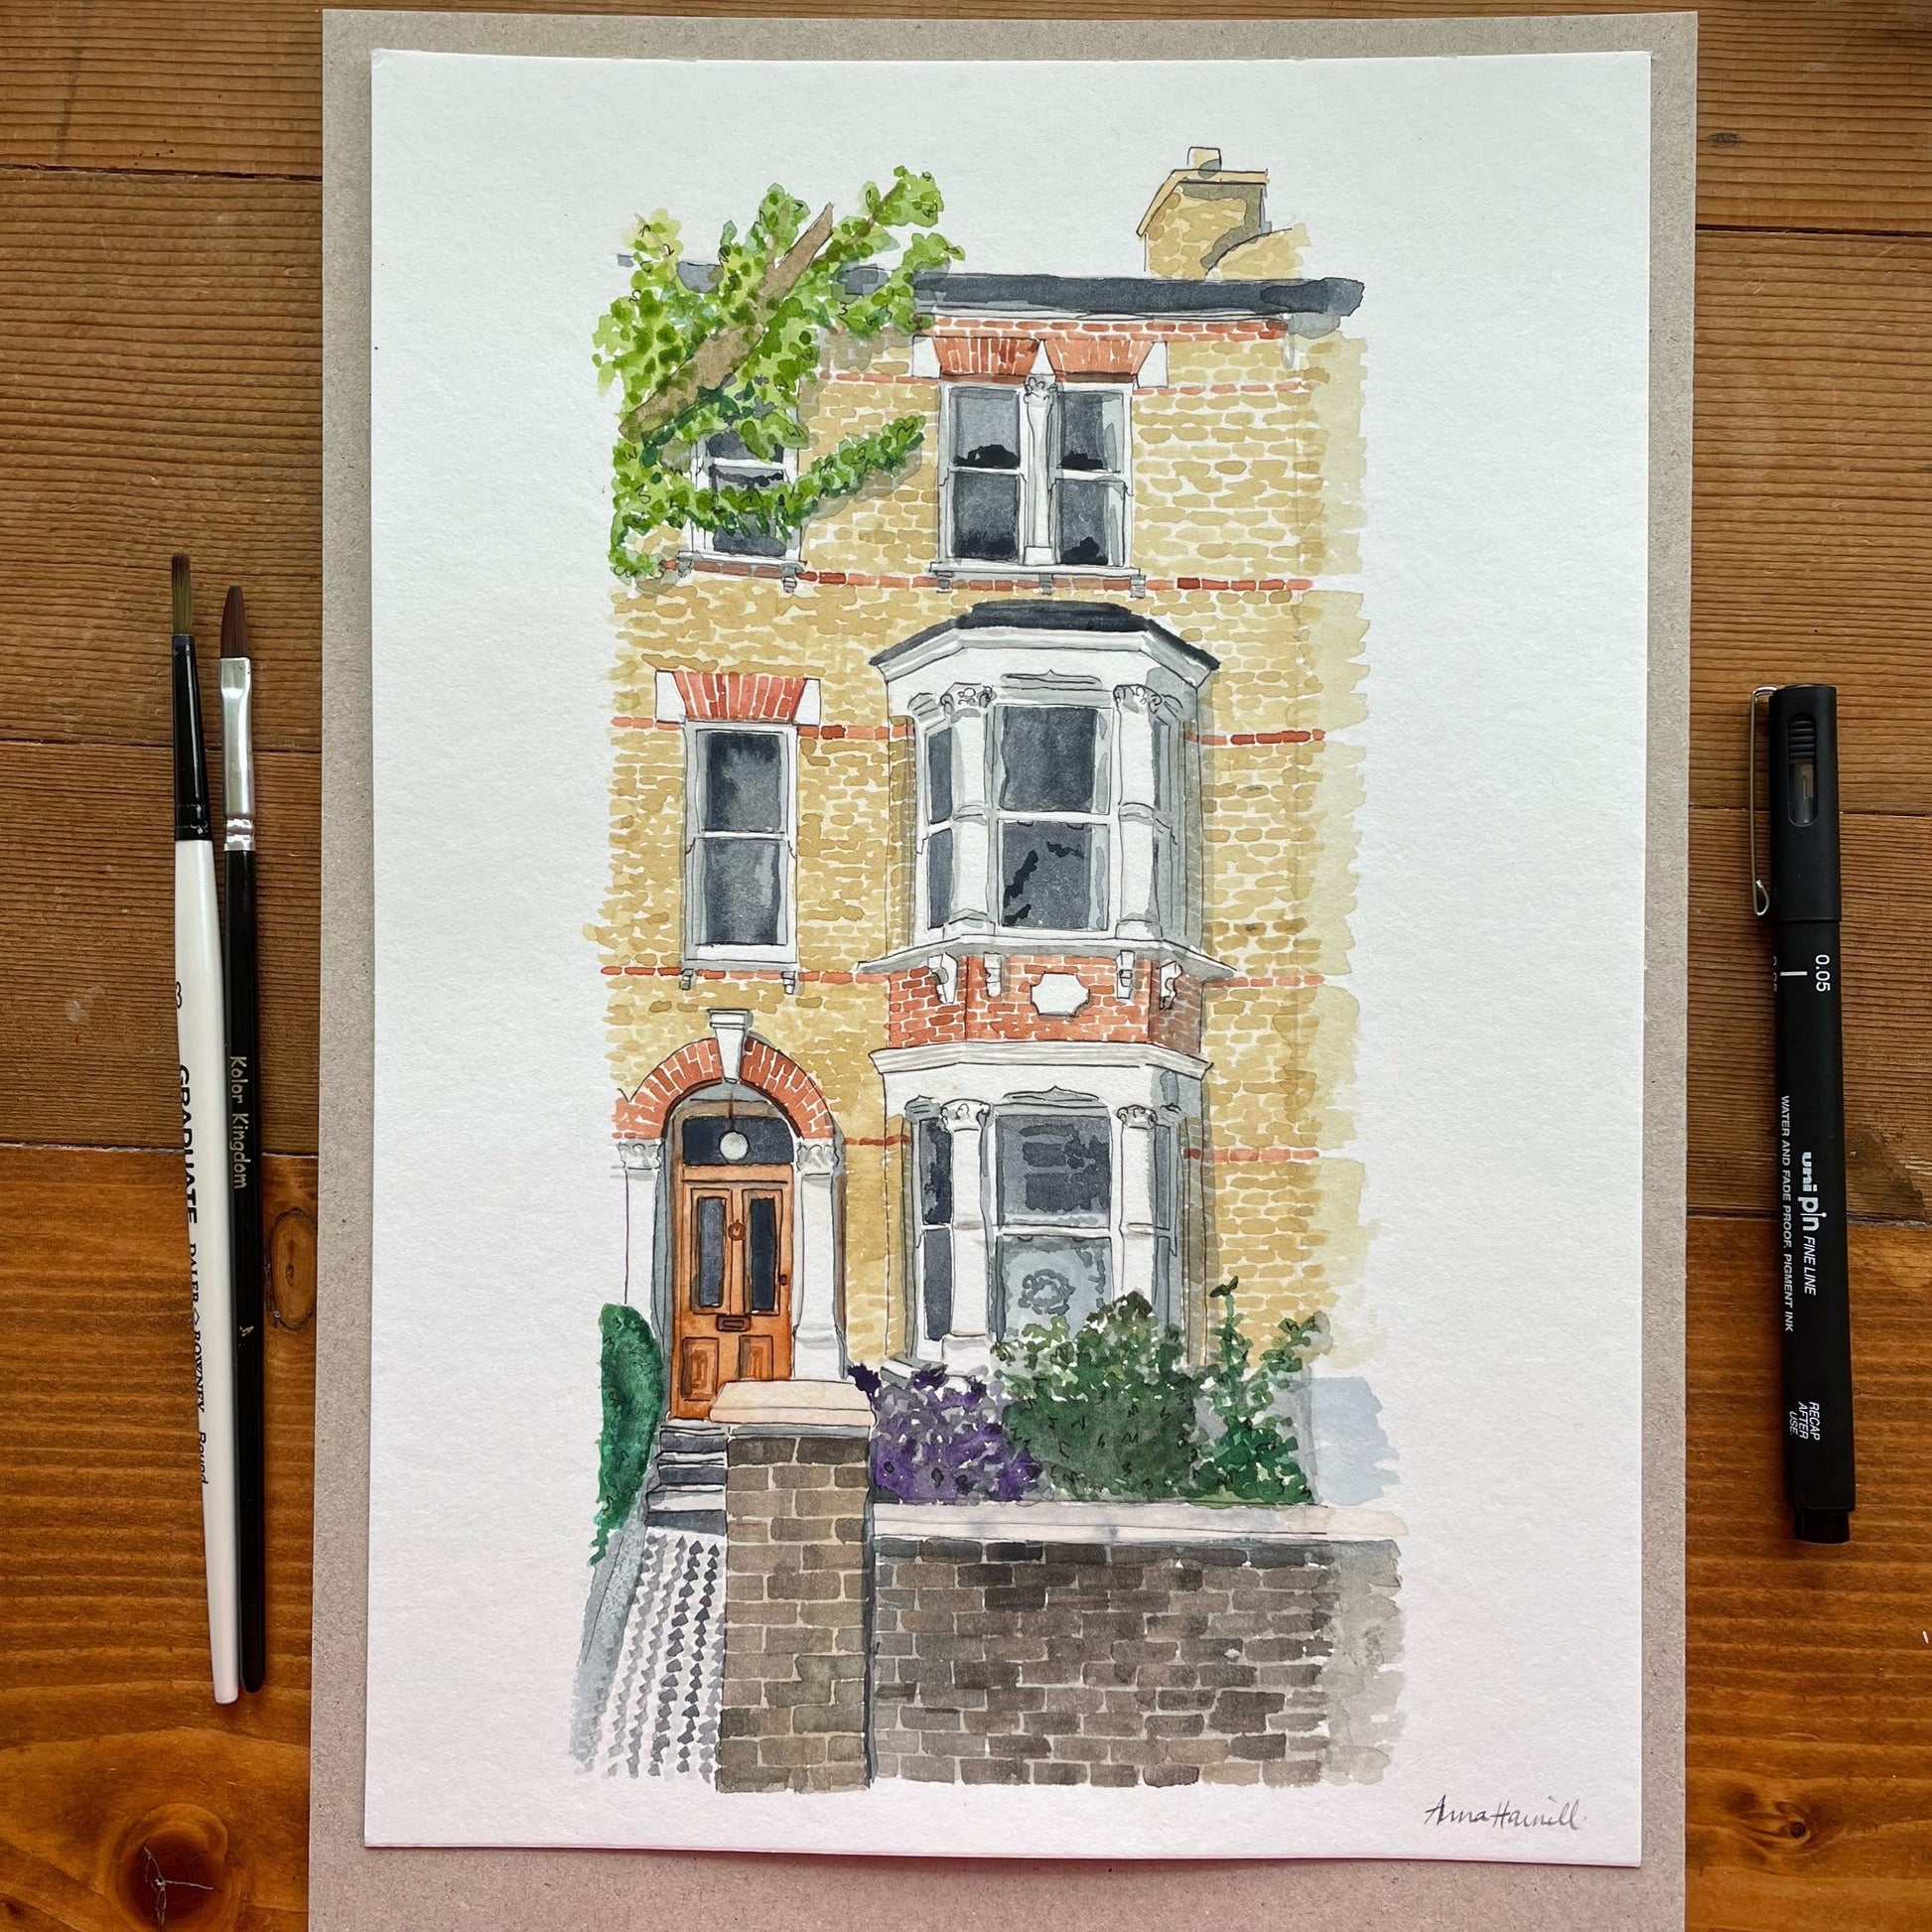 And Hope Designs Commission Custom Watercolour House Portrait